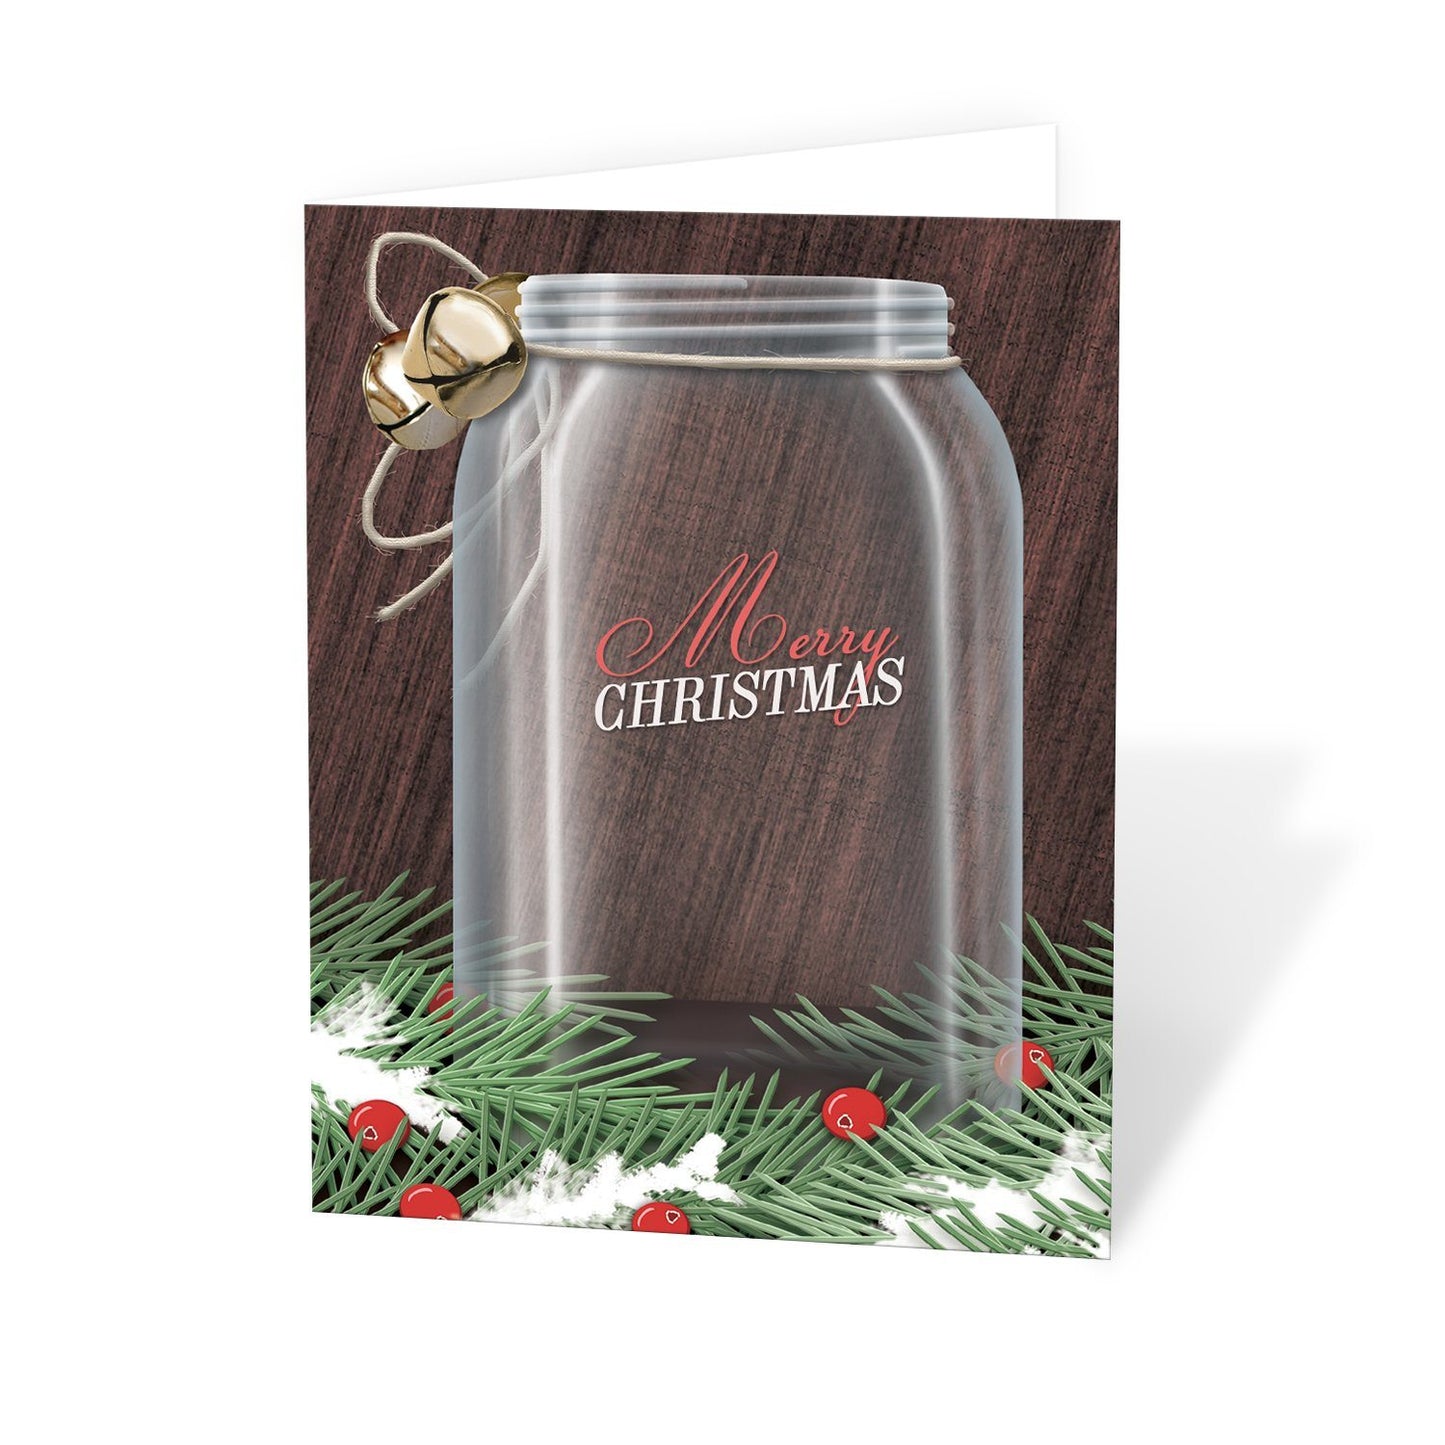 Rustic Pine Boughs Mason Jar Christmas Cards at Artistically Invited